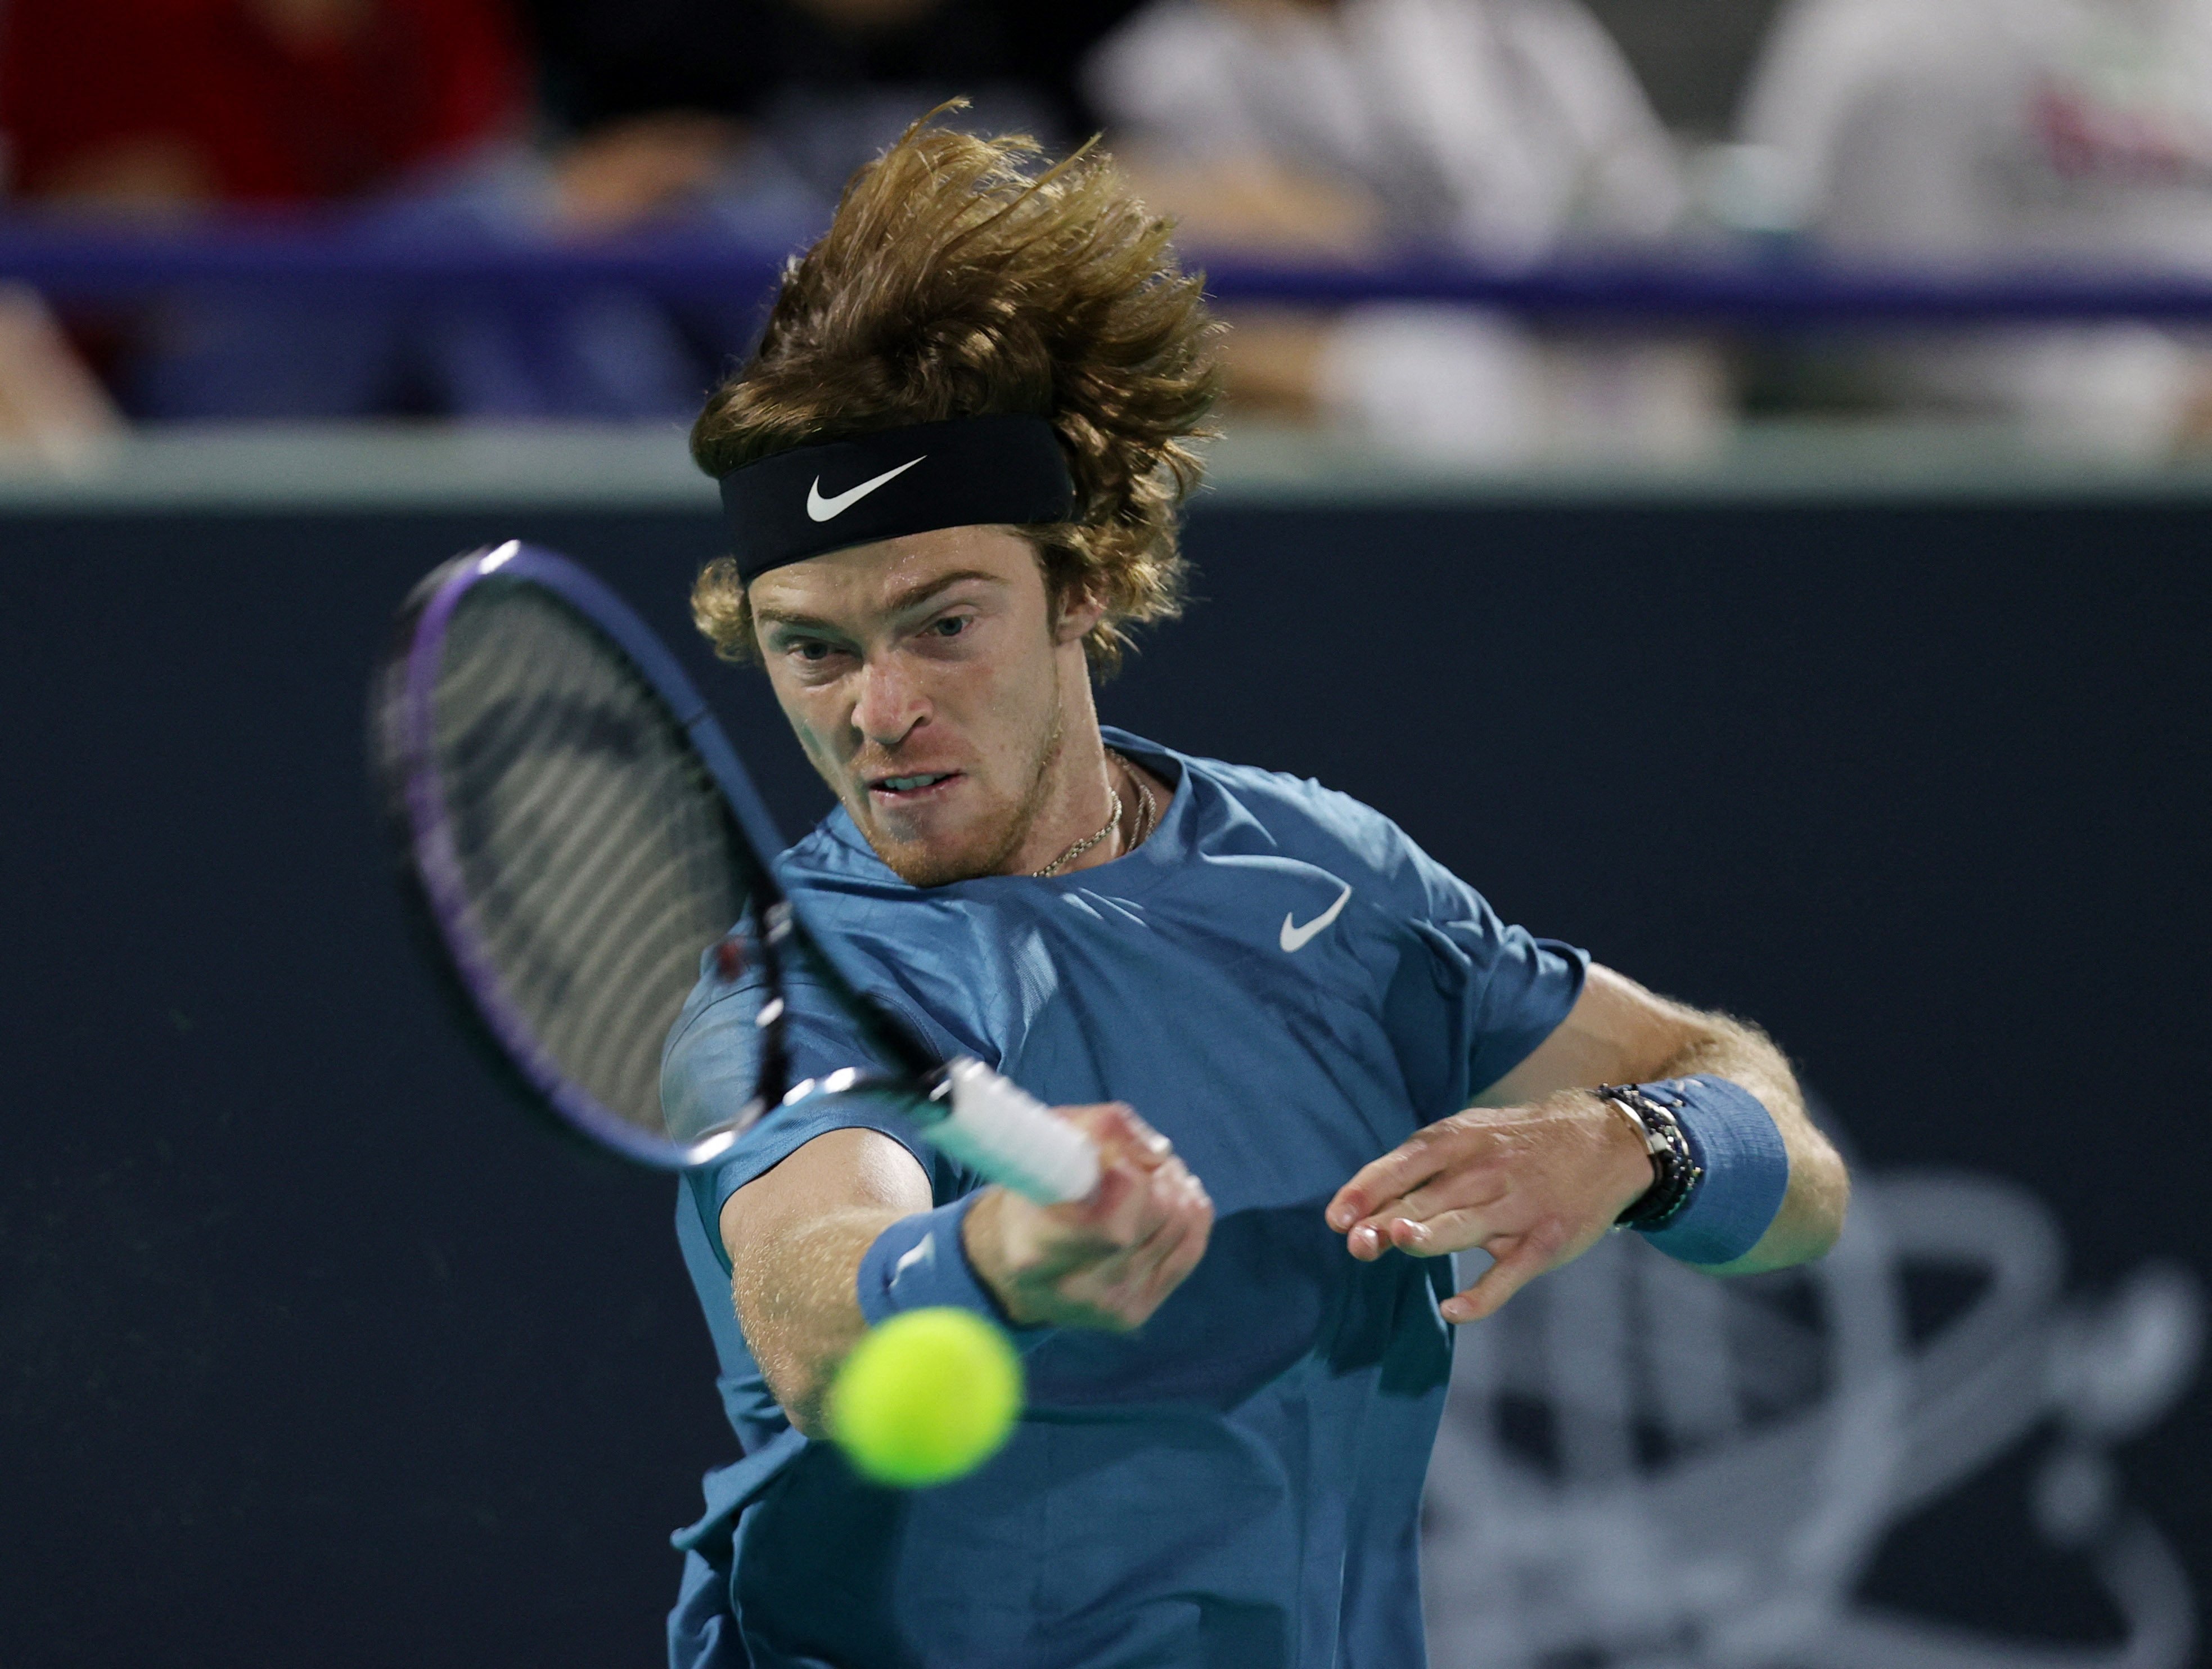 Andrey Rublev in action during his final match against Andy Murray at the Mubadala World Tennis Championship in Abu Dhabi. Photo: Reuters